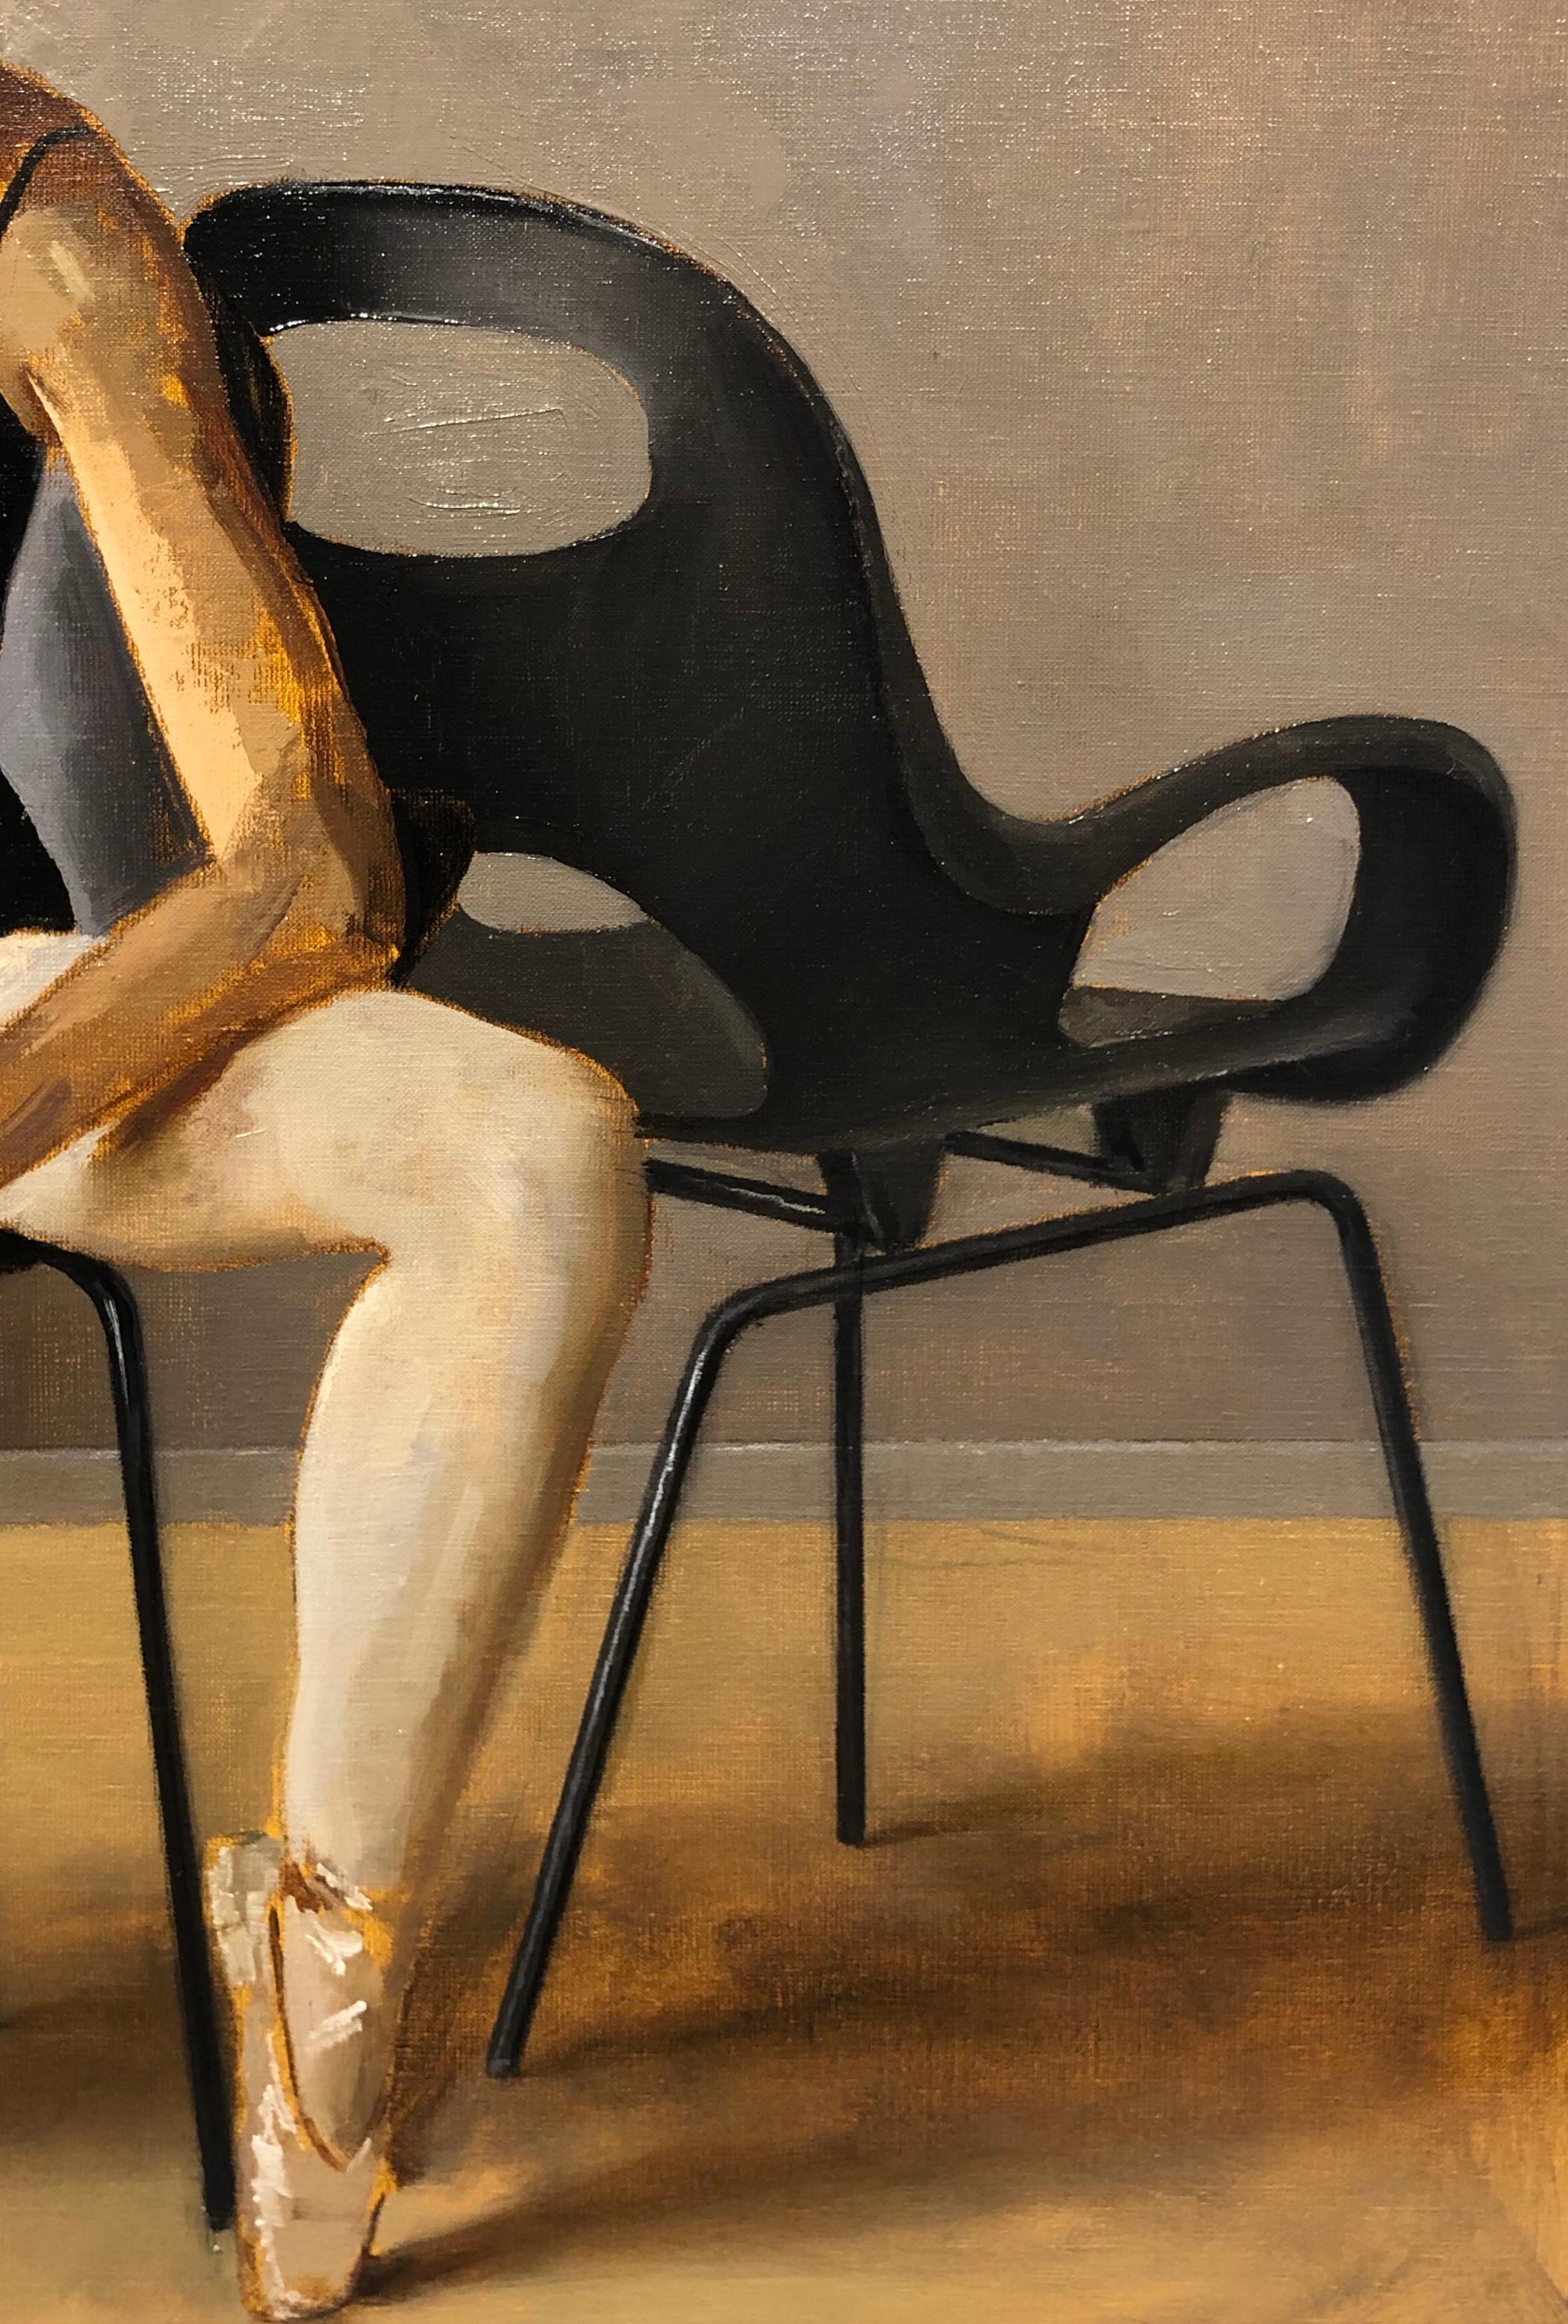 August in Leotard Seated on Oh Chair, Female Dancer, Original Oil on Panel - Brown Interior Painting by Andrew S. Conklin